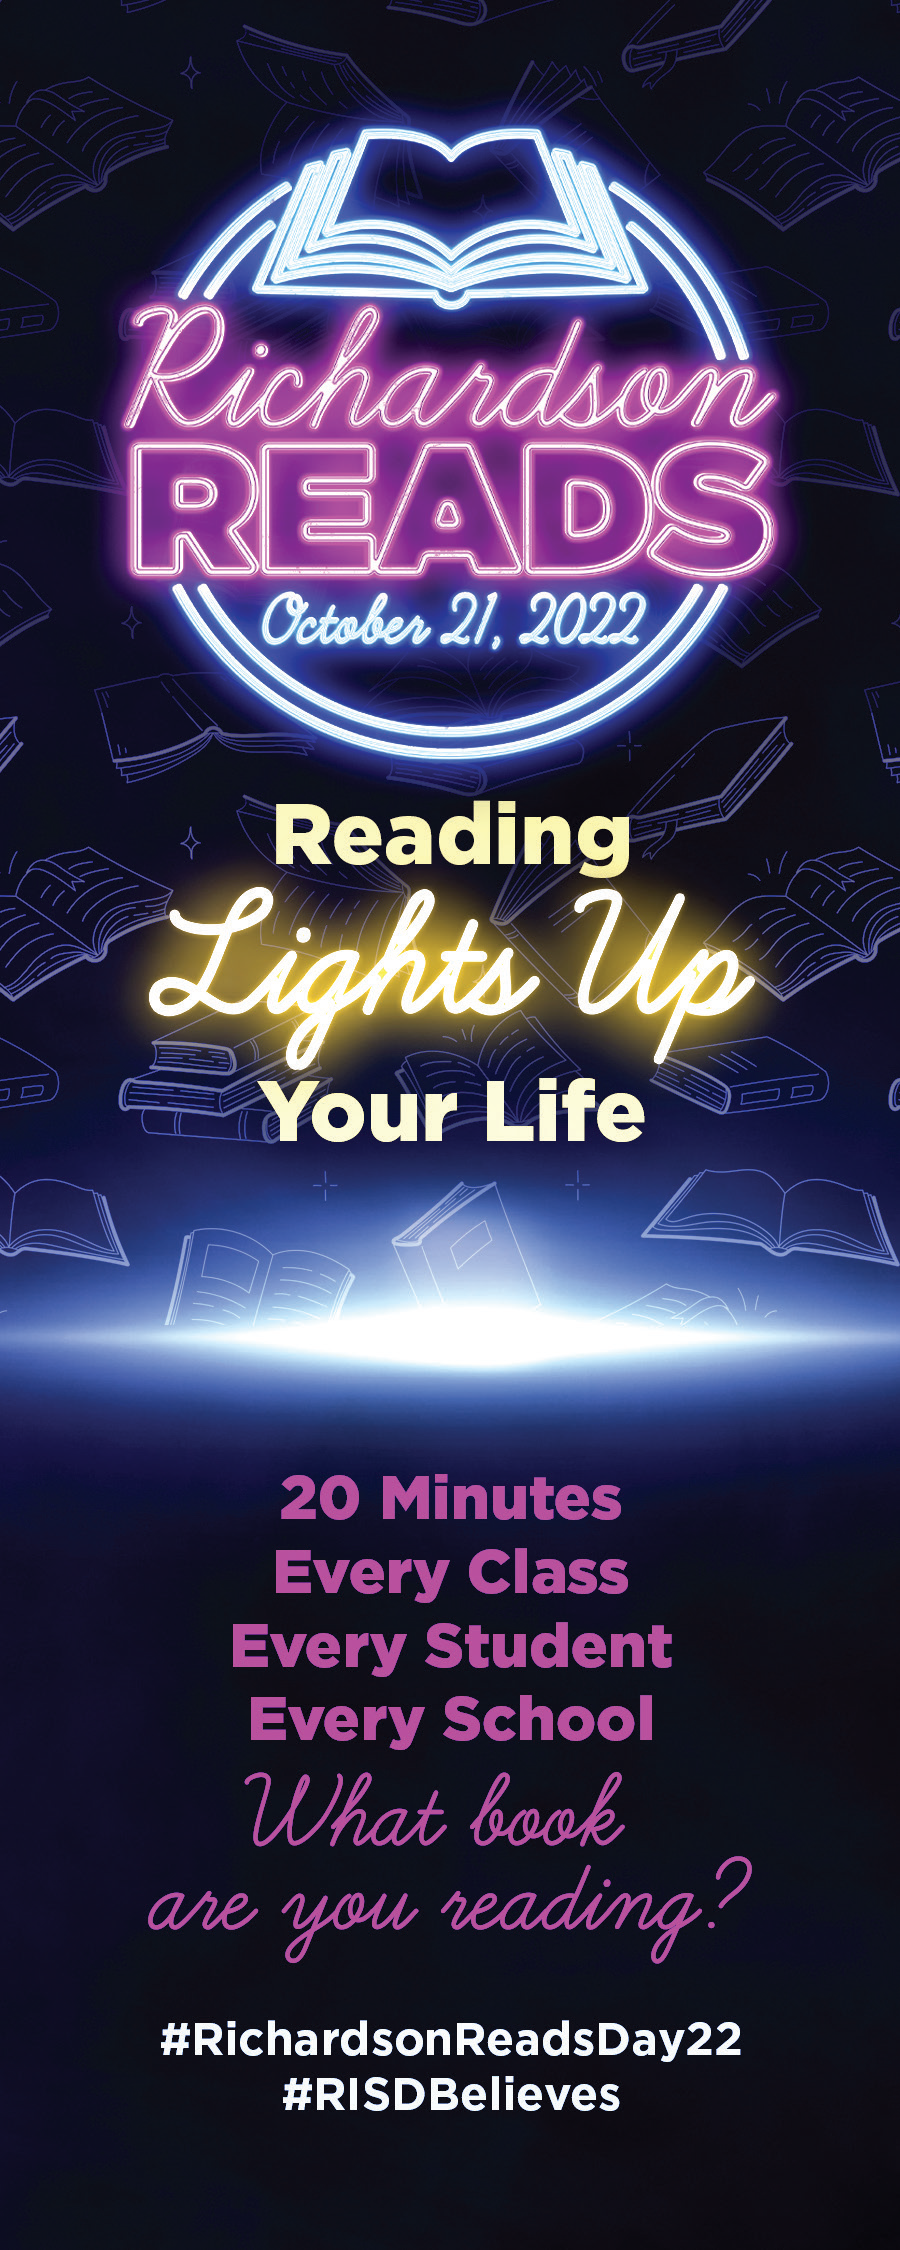 Richardson Reads October 21, 2022 Reading Lights Up Your Life. 20 minutes, every class, every student, every school. What book are you reading? #RichardsonReadsDay 22 #RISDBelieves